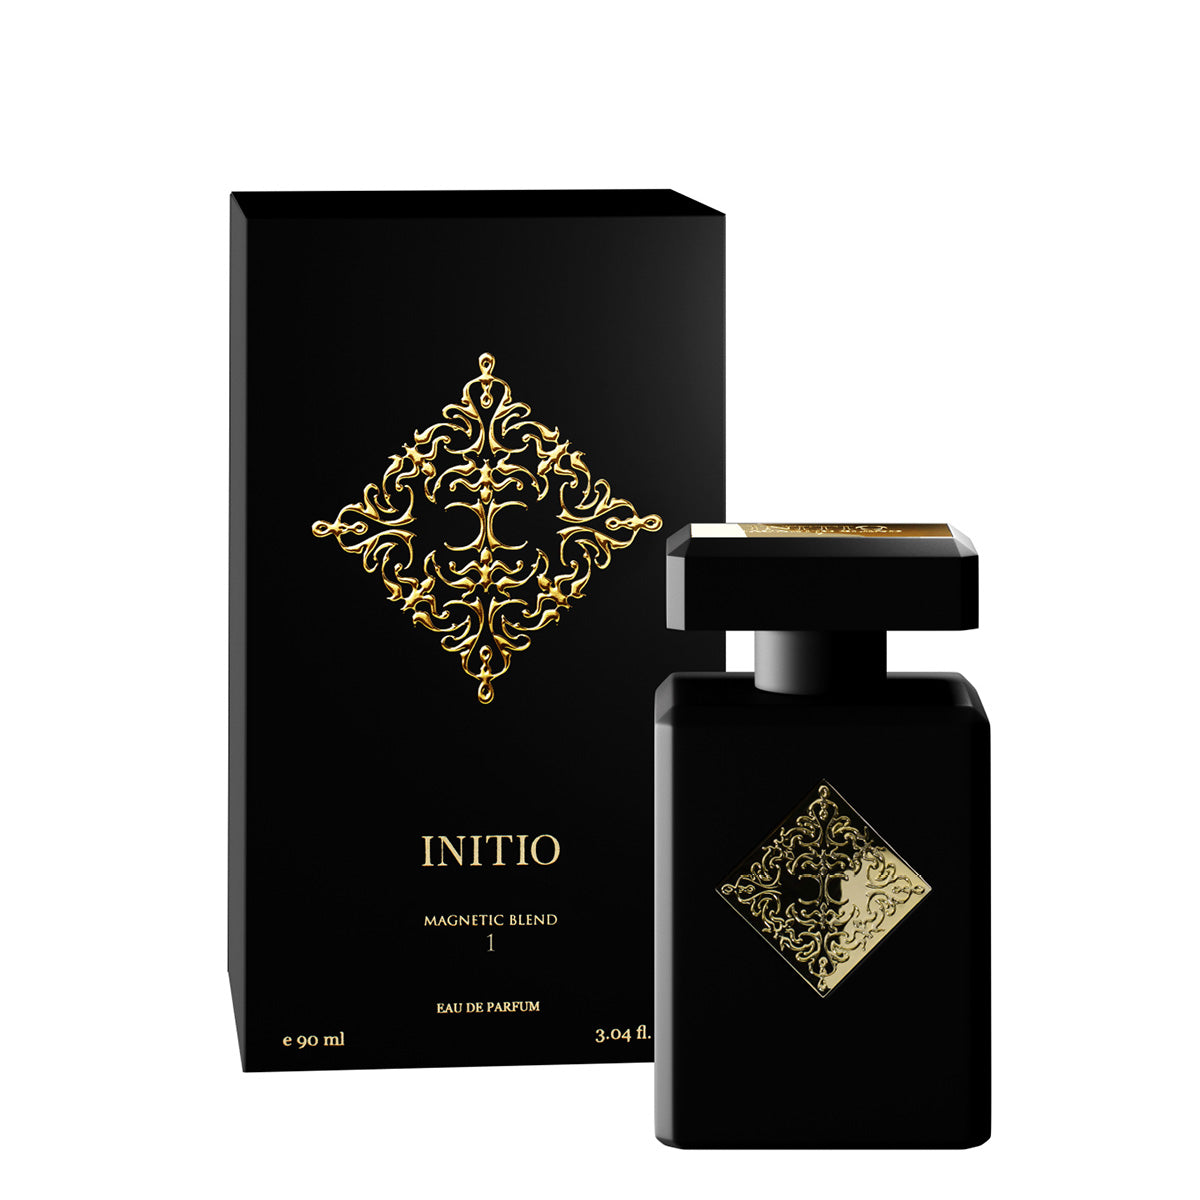 Initio Magnetic Blend 1 - Bellini's Skin and Parfumerie